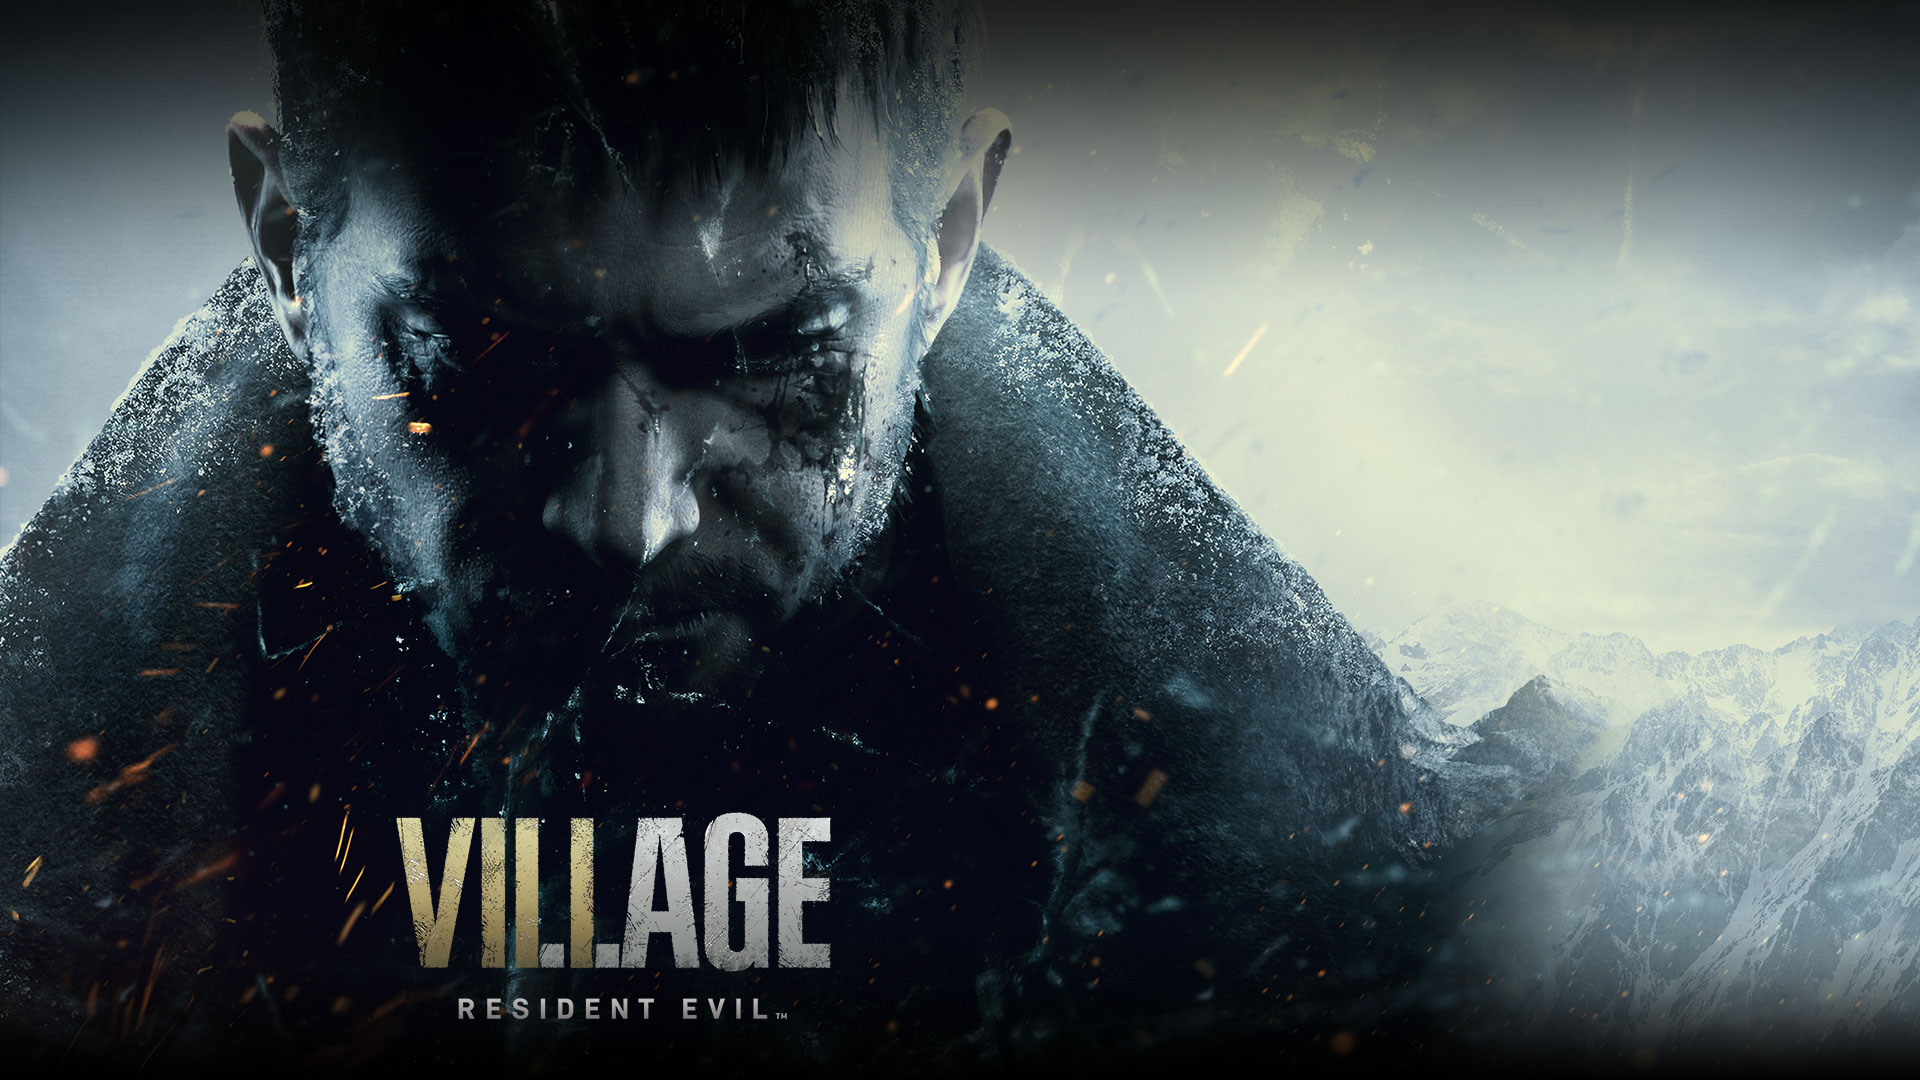 Resident Evil Village DLC will conclude the Winters' saga